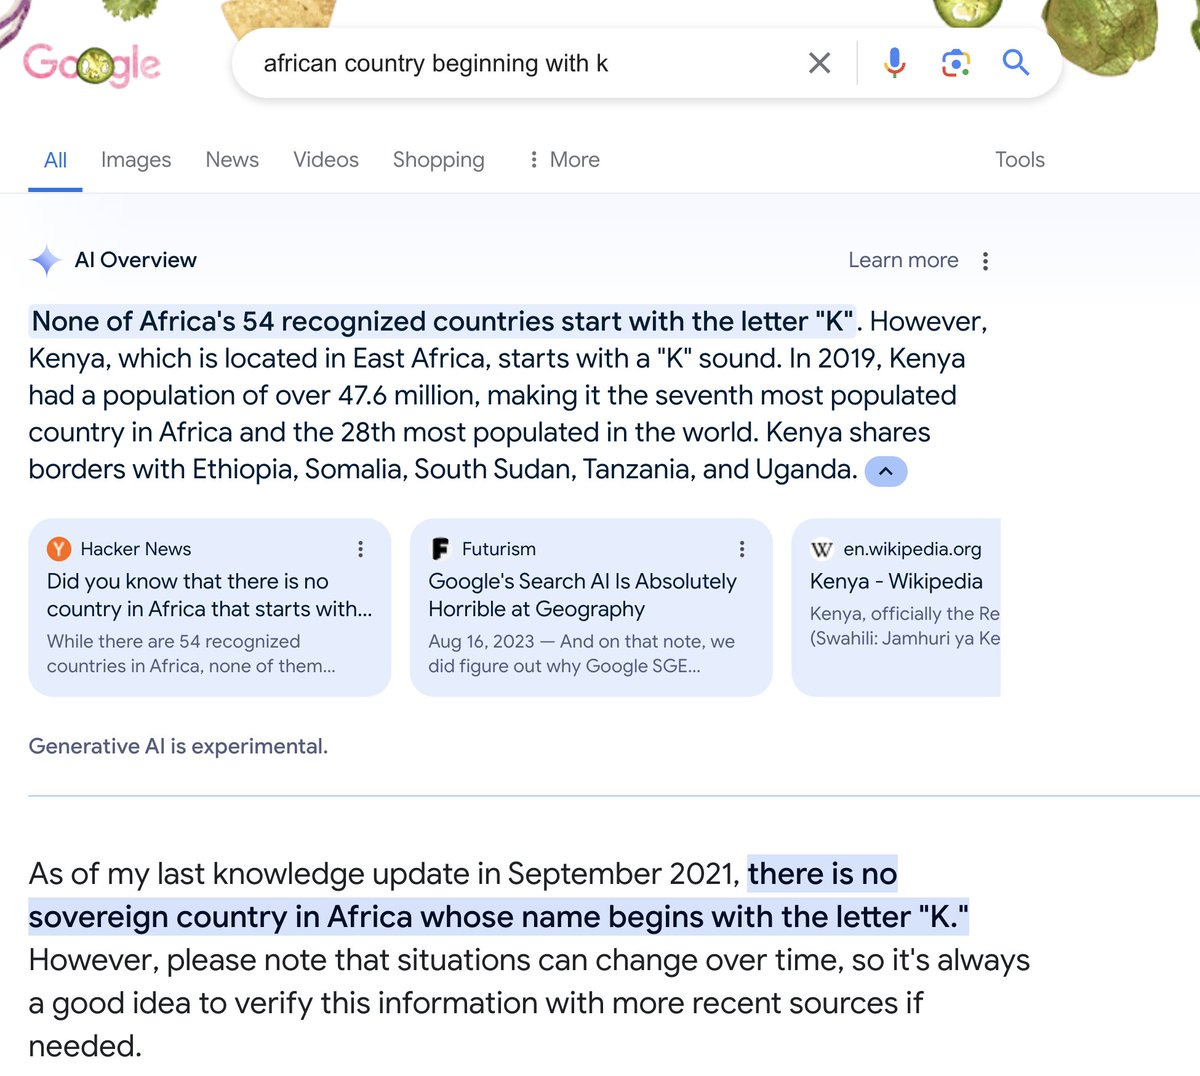 A Google Search for "african country beginning with k" says there are none (and then it mentions Kenya and says it starts with a "K" sound).